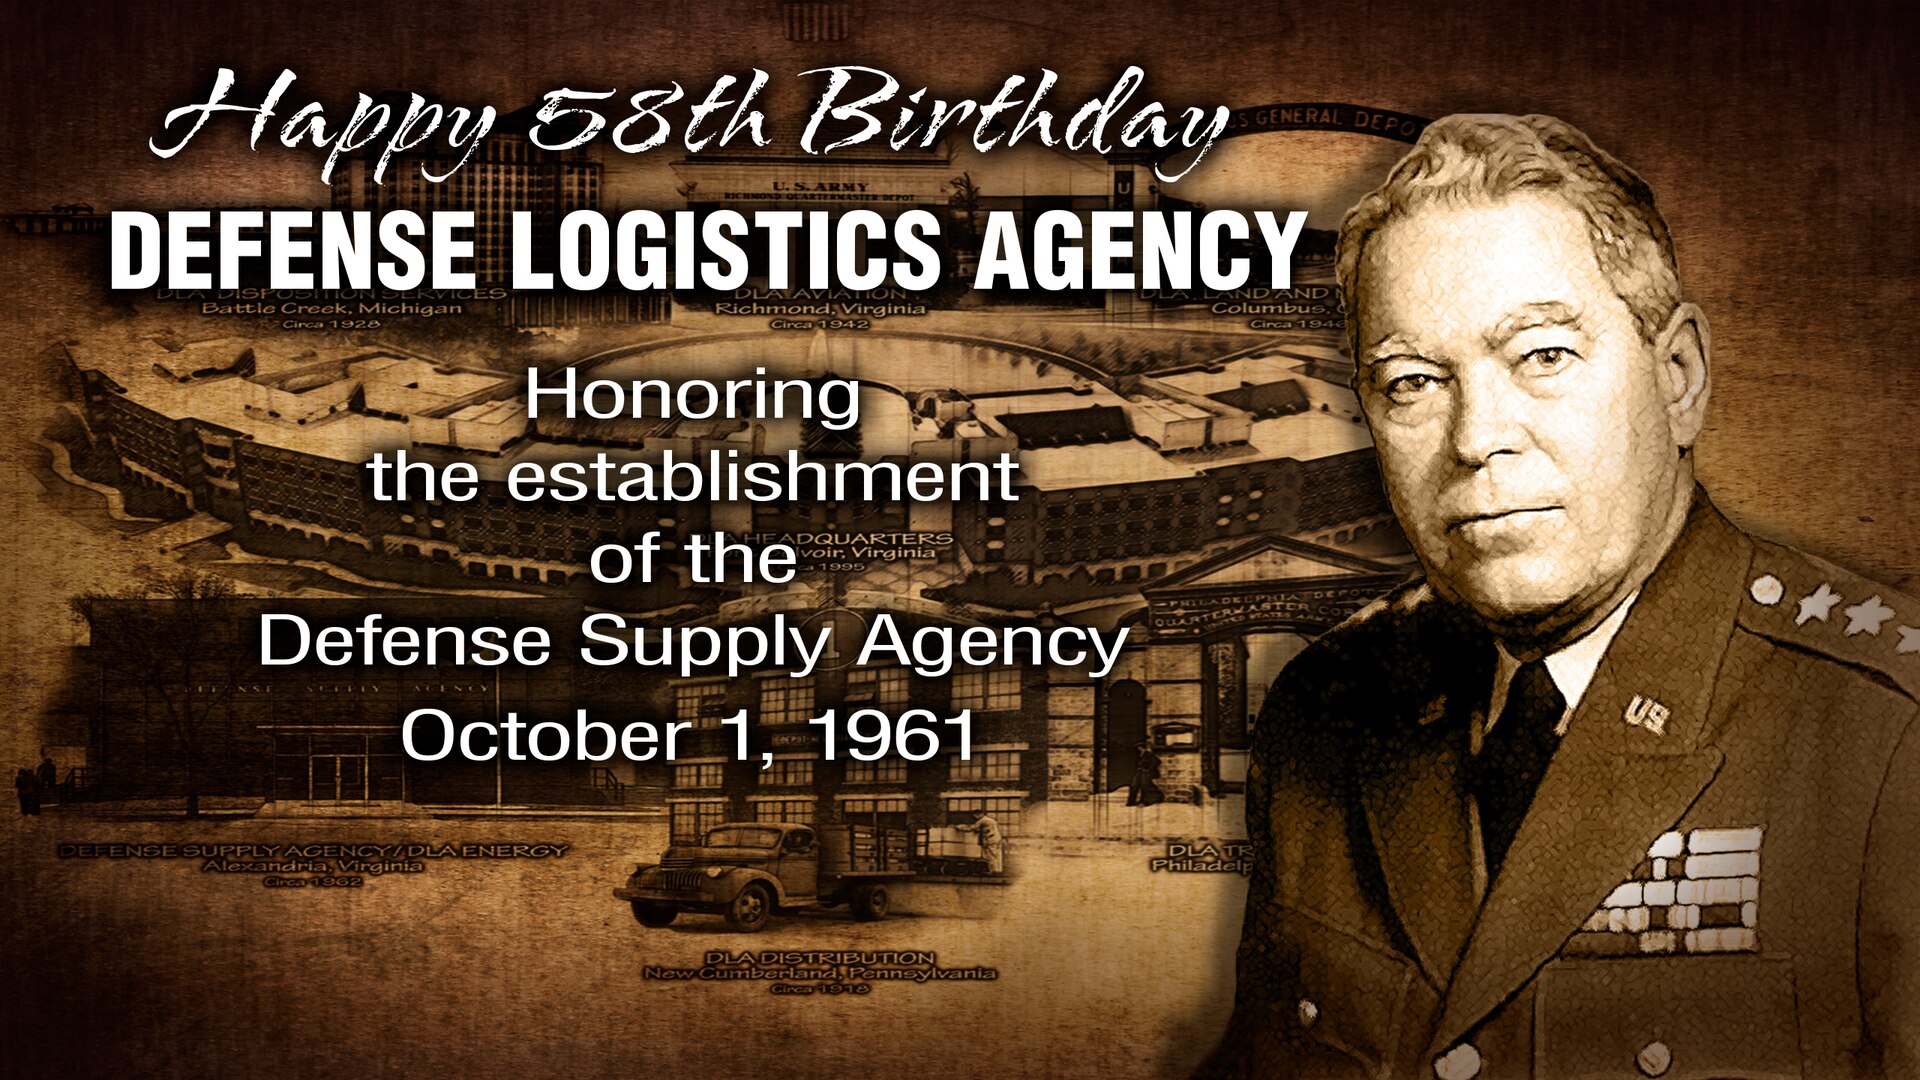 The Defense Logistics Agency celebrates its 58th birthday Oct. 1. The agency’s mission has changed and expanded since Army Lt. Gen. Andrew T. McNamara took command in 1961, but DLA employees still provide world-class logistics support. Graphic illustration of Gen. McNamara's portrait over the DLA headquarters building.